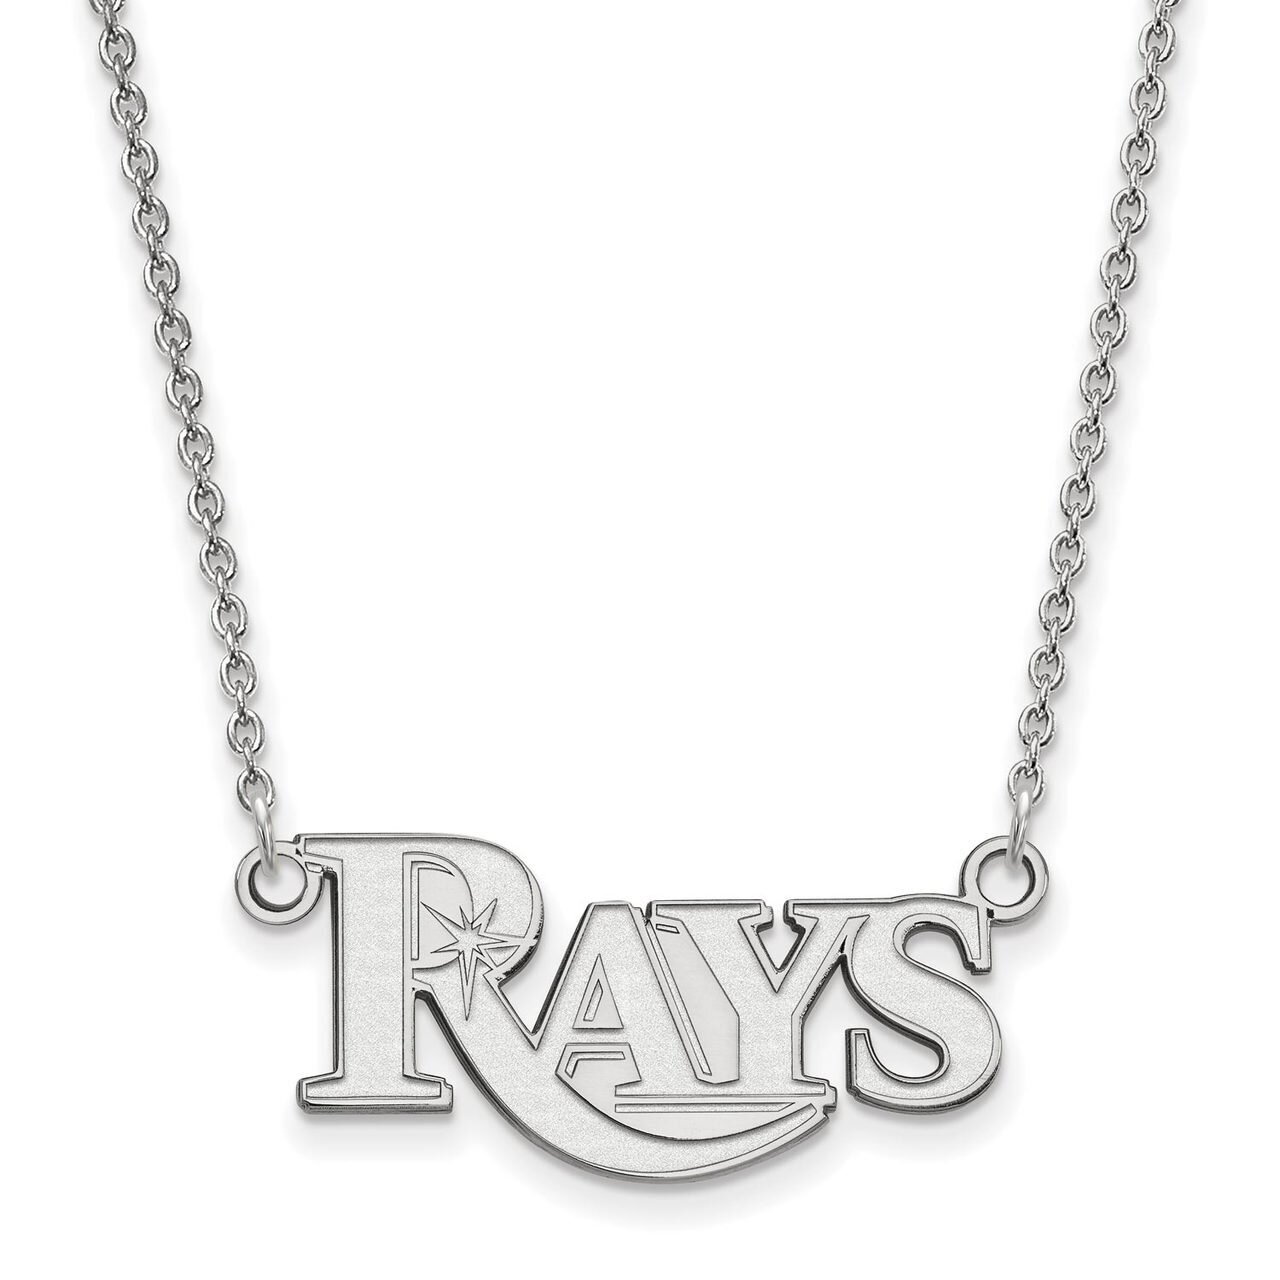 Tampa Bay Rays Small Pendant with Chain Necklace 14k White Gold 4W018DEV-18